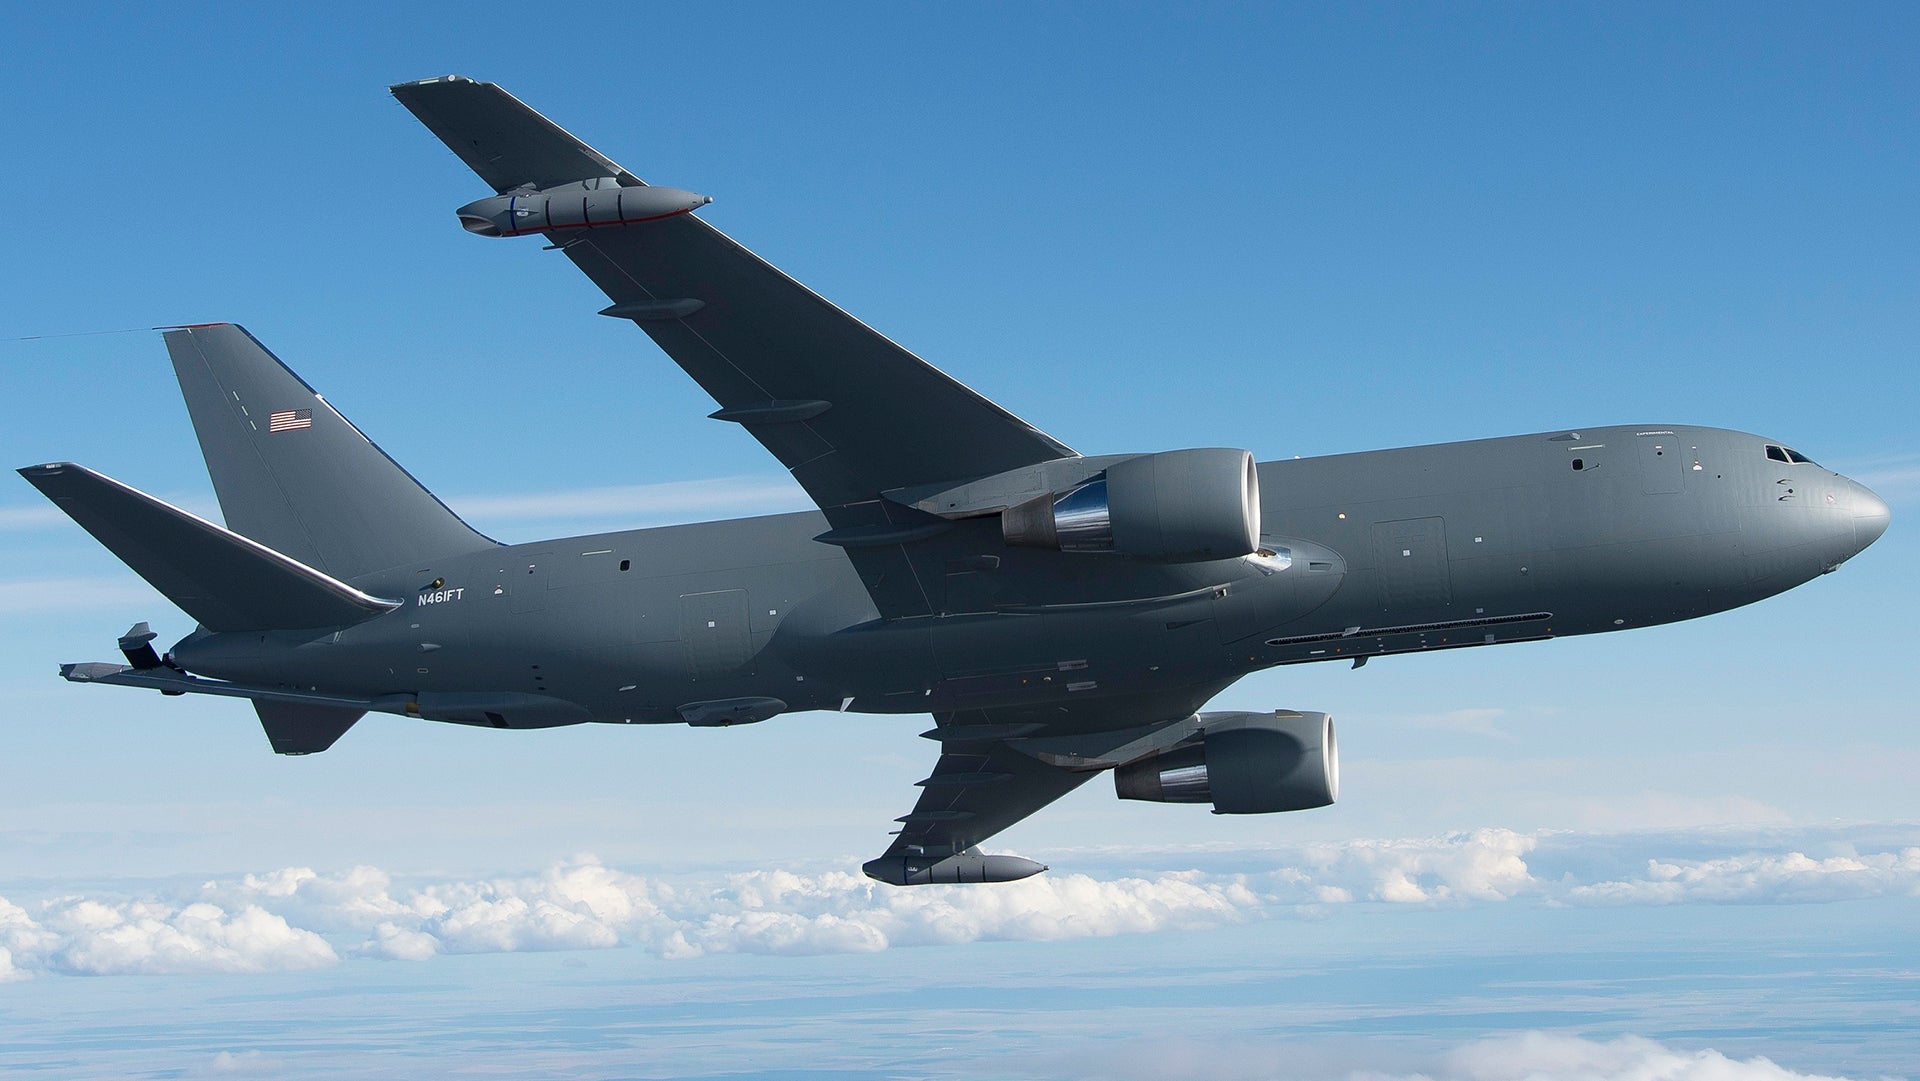 Boeing’s Troubled New KC-46 Pegasus Tanker Just Flew Across The Pacific Ocean To Japan